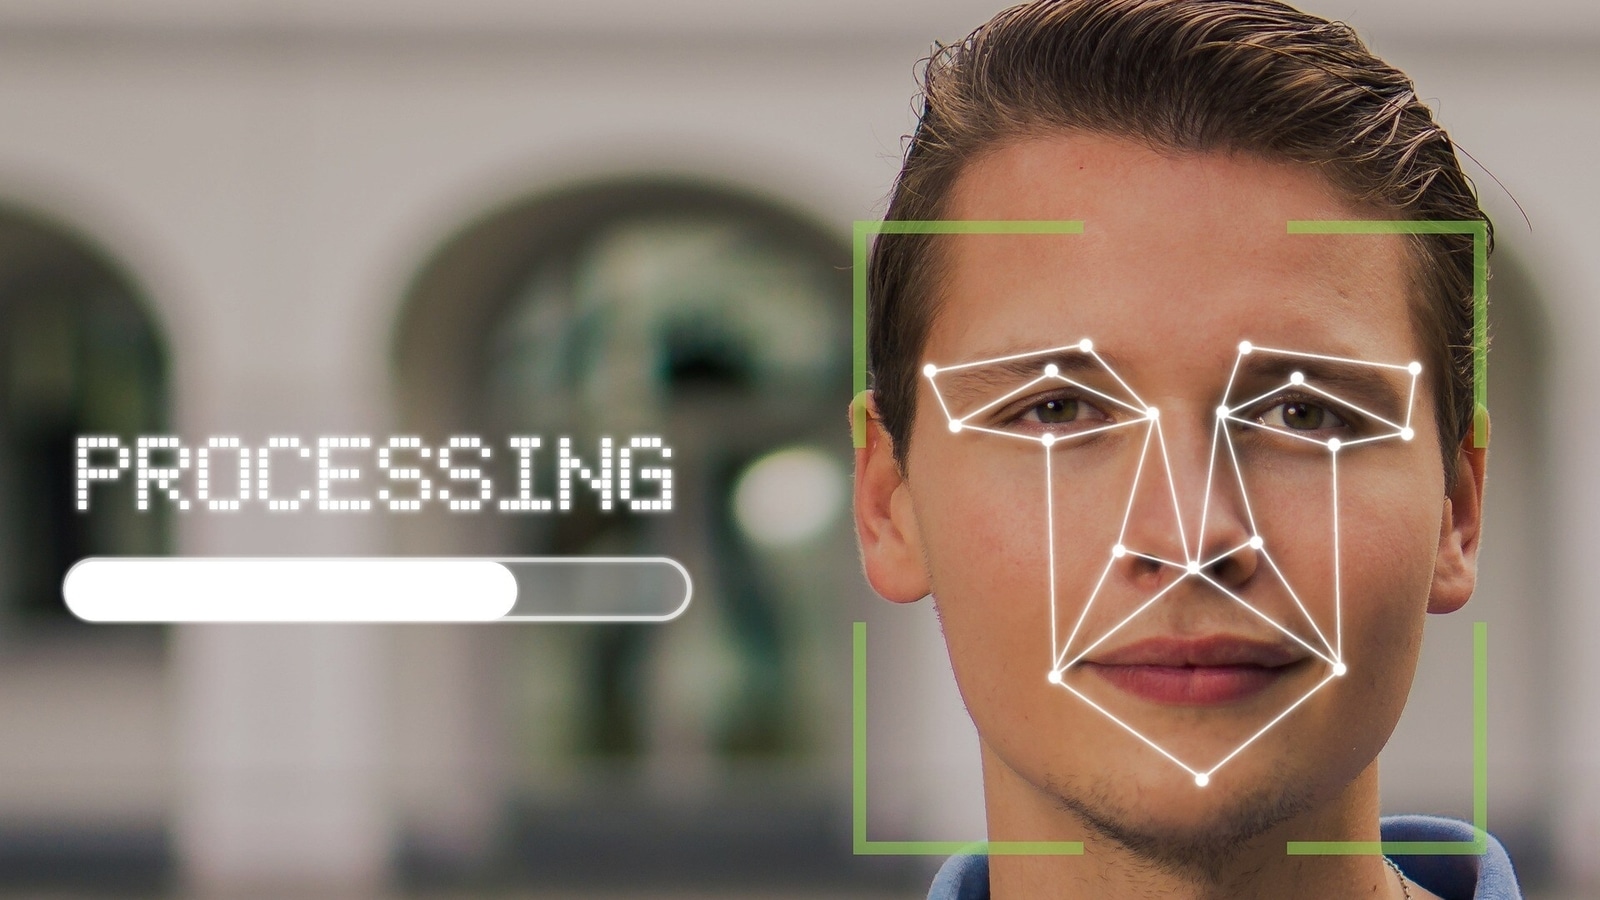 Investors call for an ethical approach to facial recognition technology ...